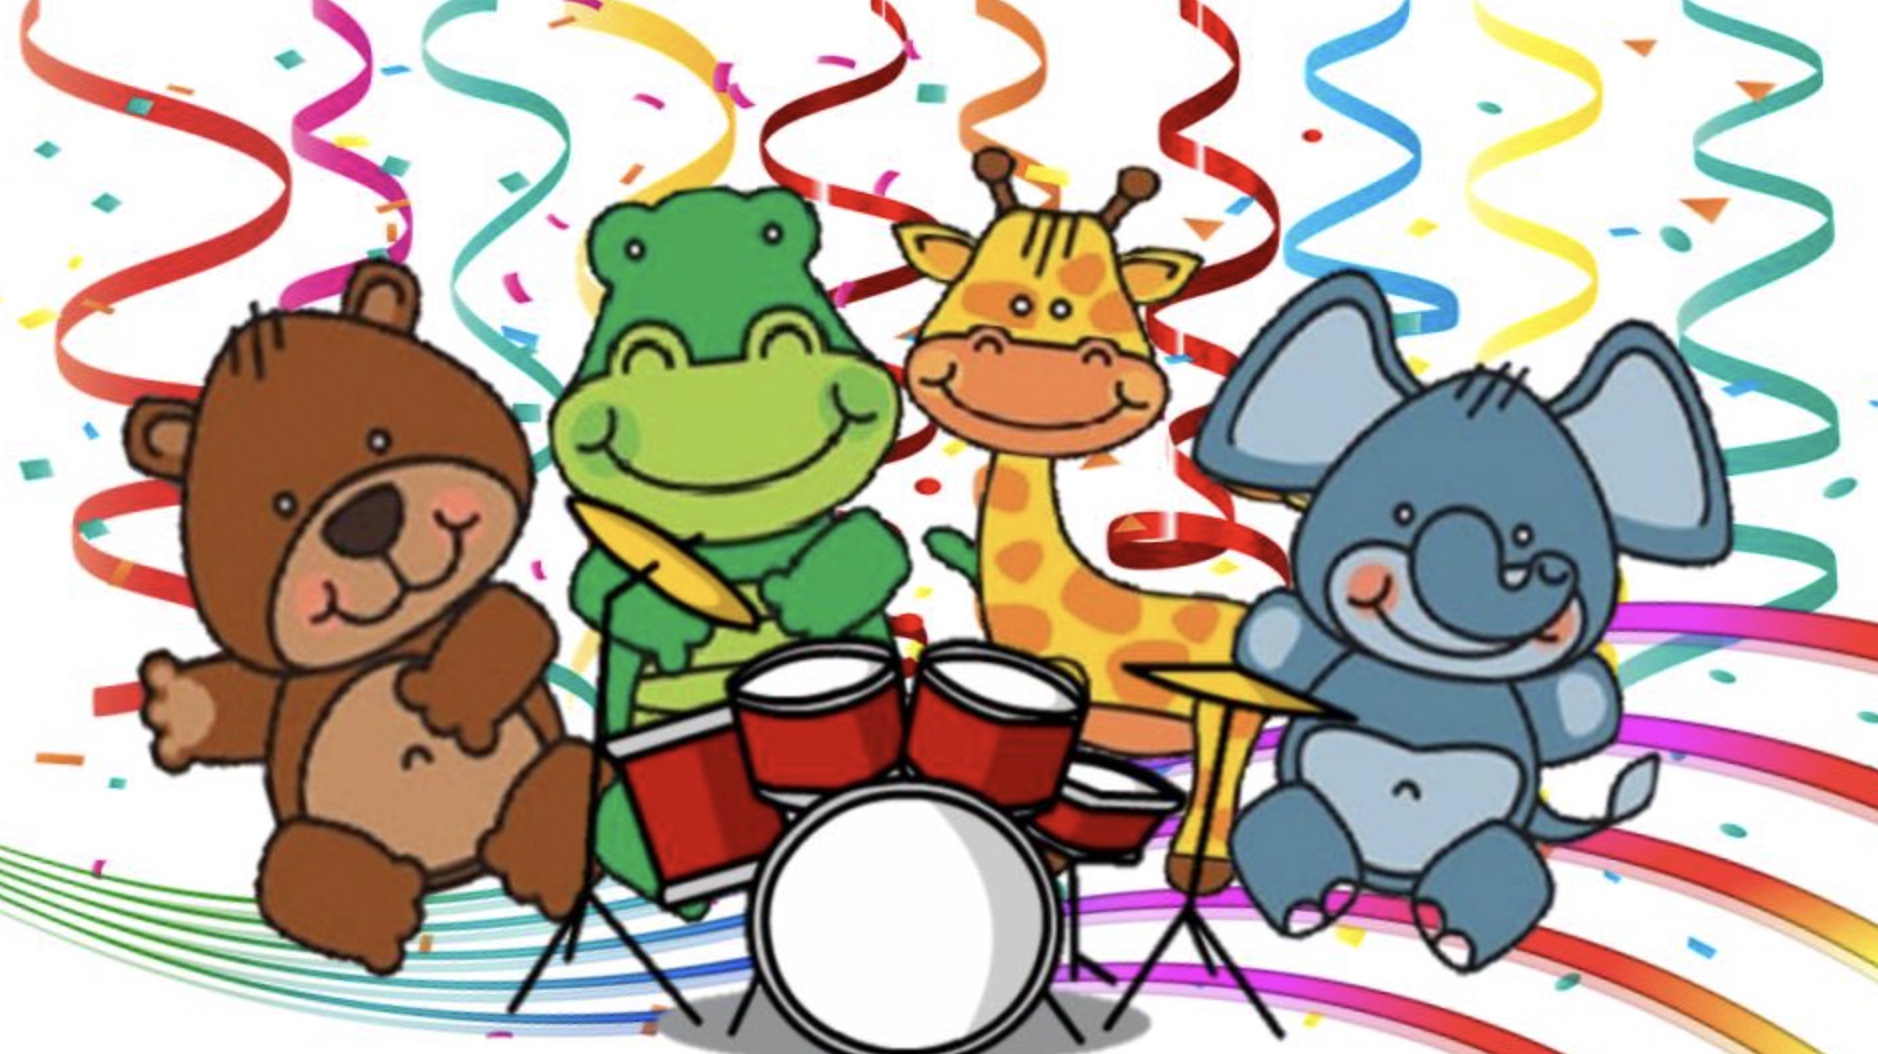 Which Drumming Animal Does Your Baby Like?